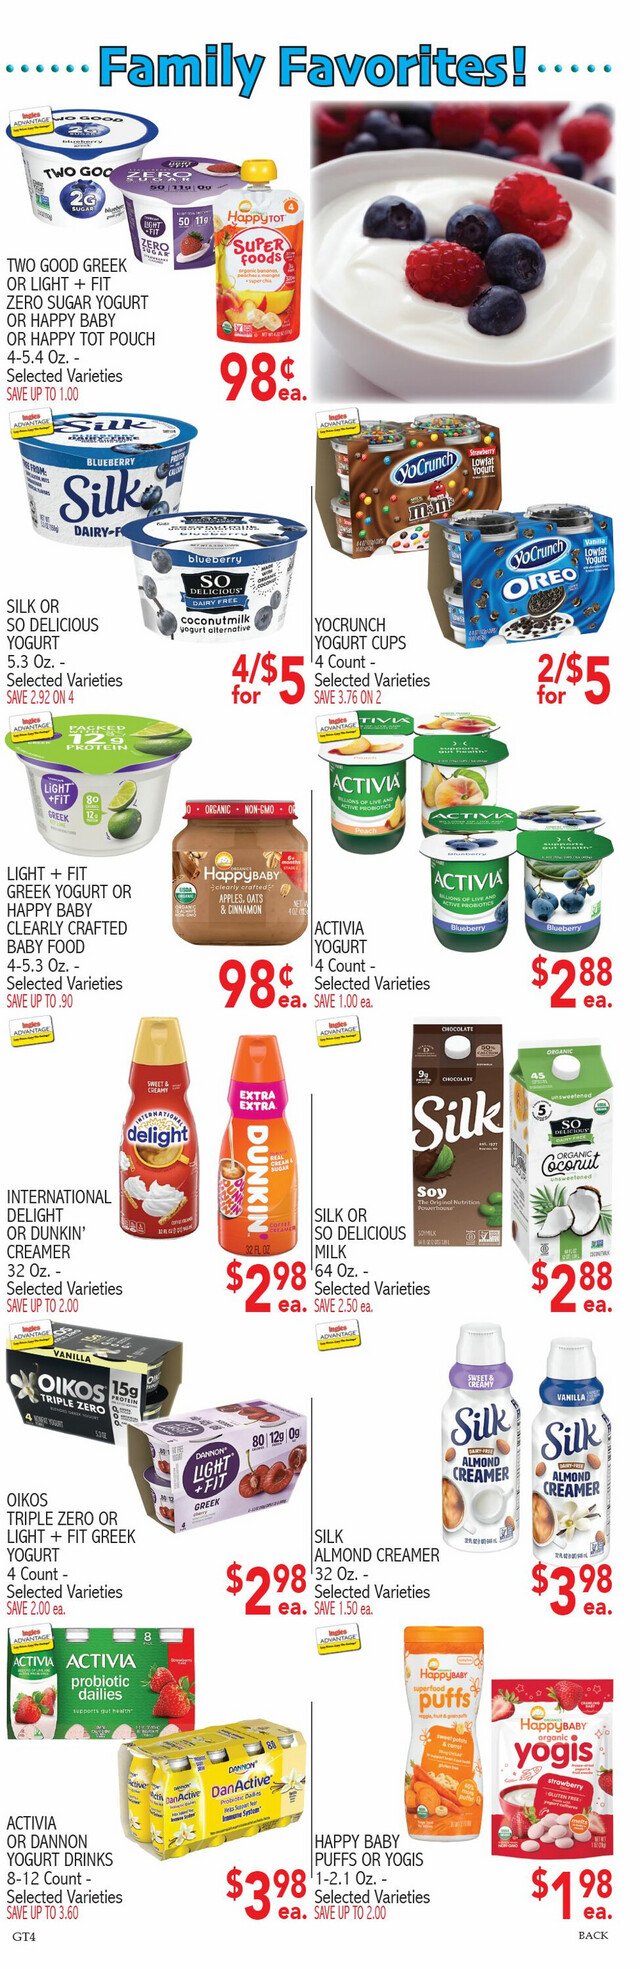 Ingles Ad from 12/13/2023